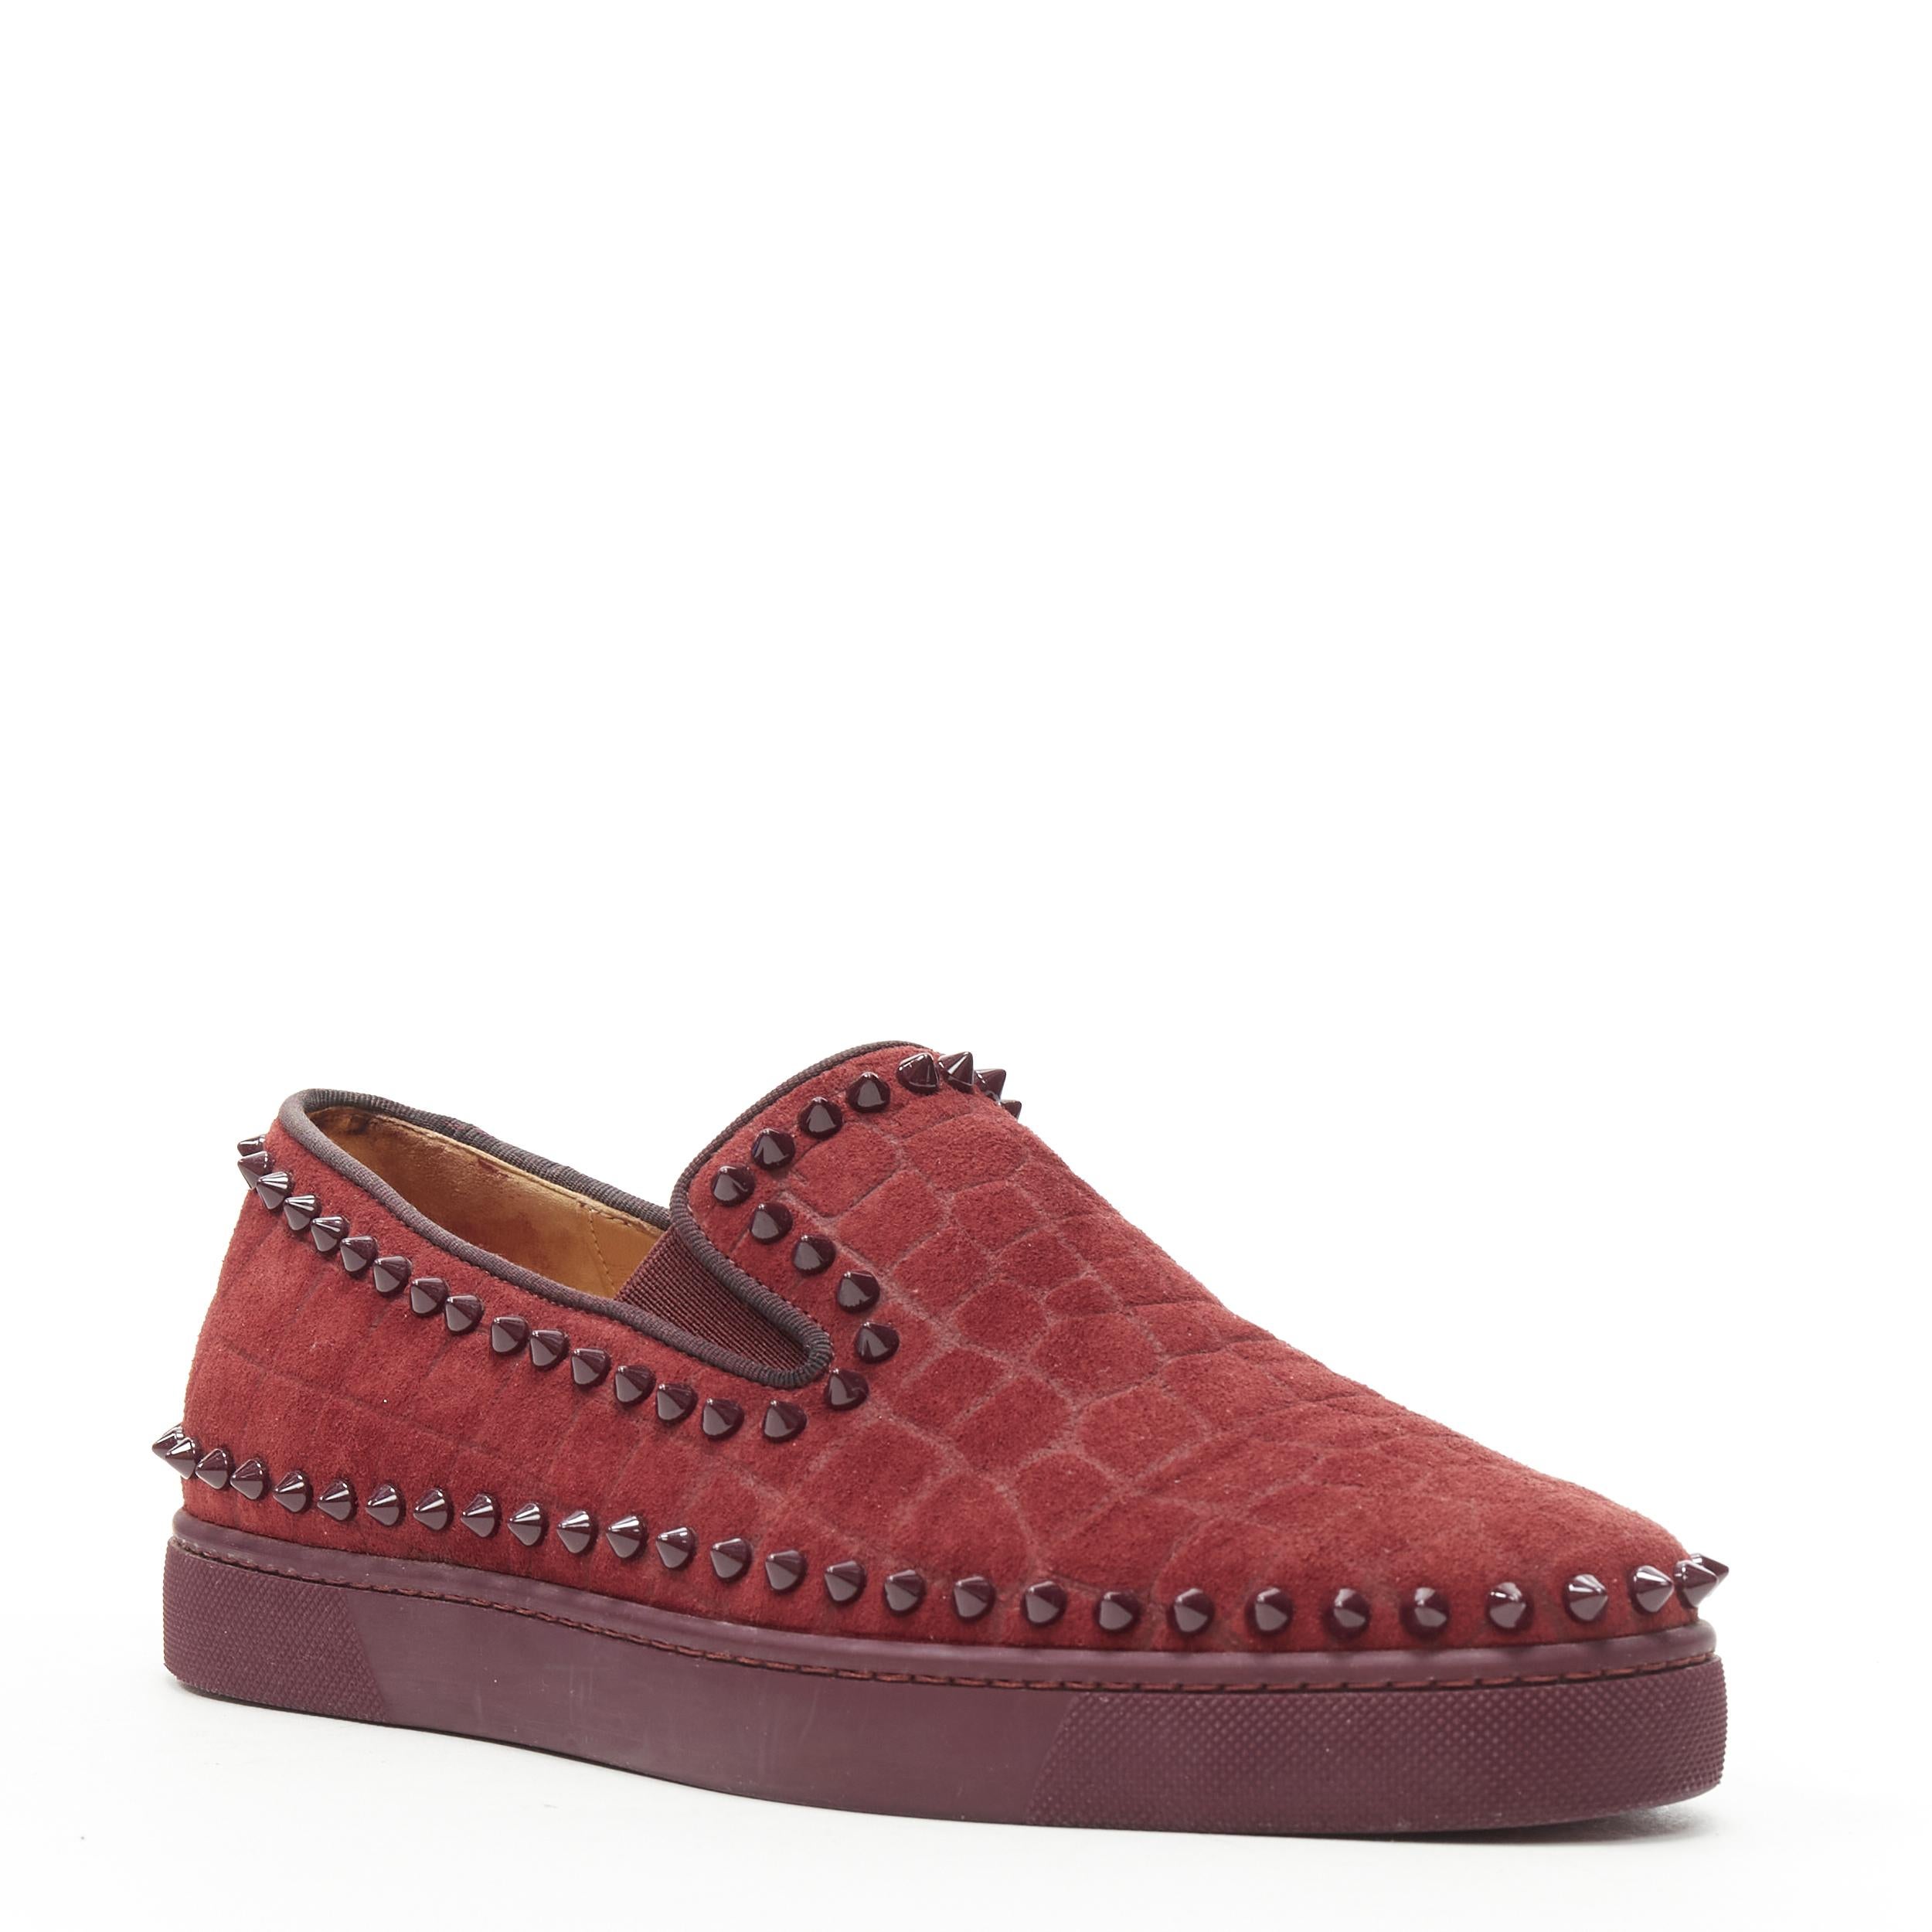 CHRISTIAN LOUBOUTIN Pik Boat burgundy croc suede spike stud low top sneaker EU41 
Reference: TGAS/B01045
Brand: Christian Louboutin 
Designer: Christian Louboutin 
Model: Pik Boat suede low top 
Material: Suede 
Color: Red 
Pattern: Solid 
Extra